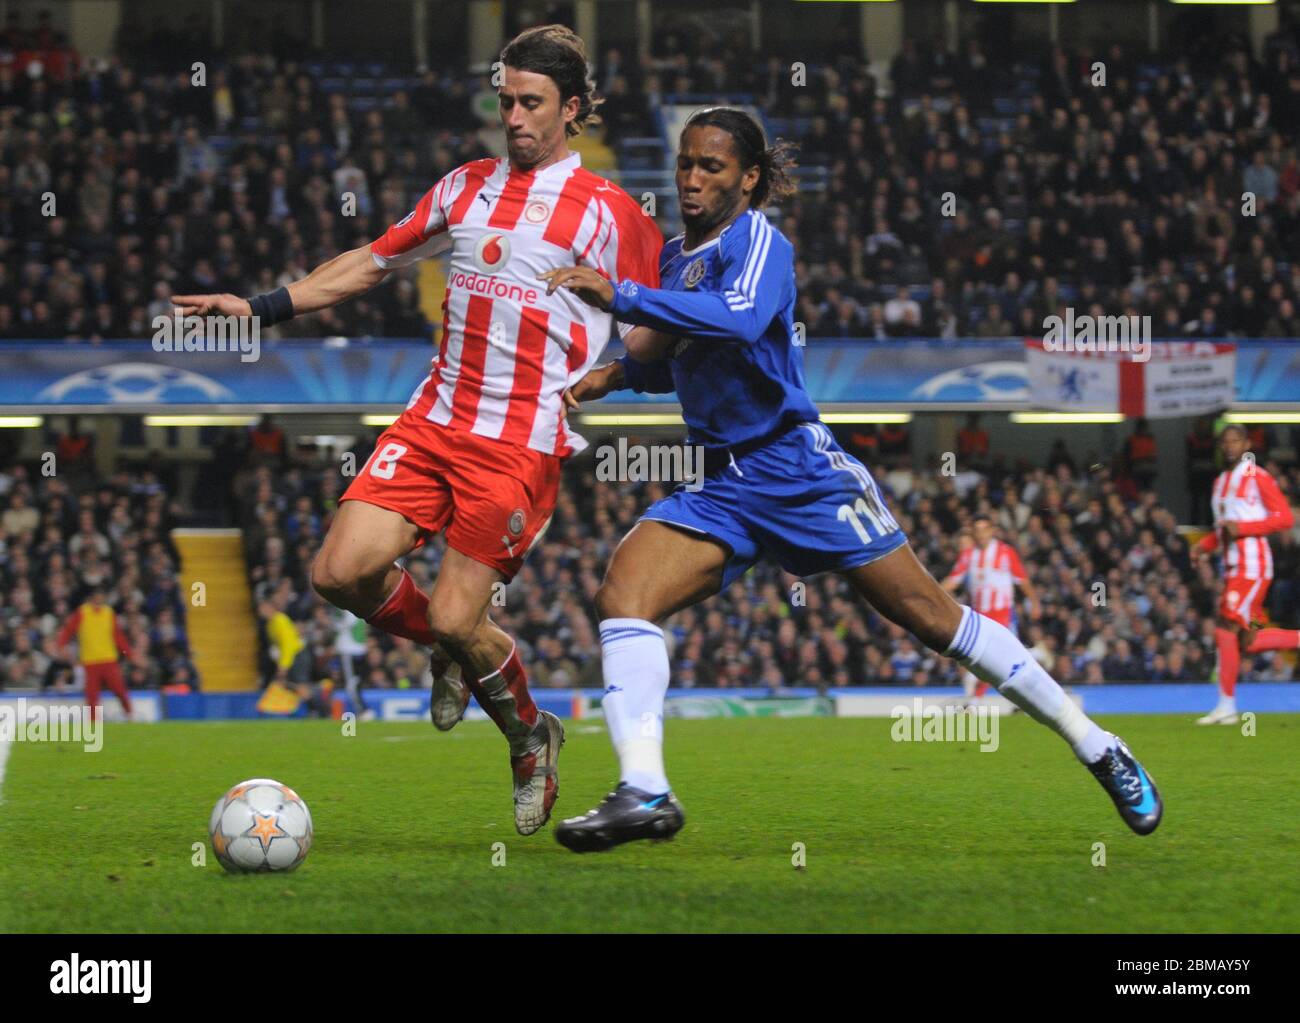 L R Didier Drogba High Resolution Stock Photography and Images - Alamy